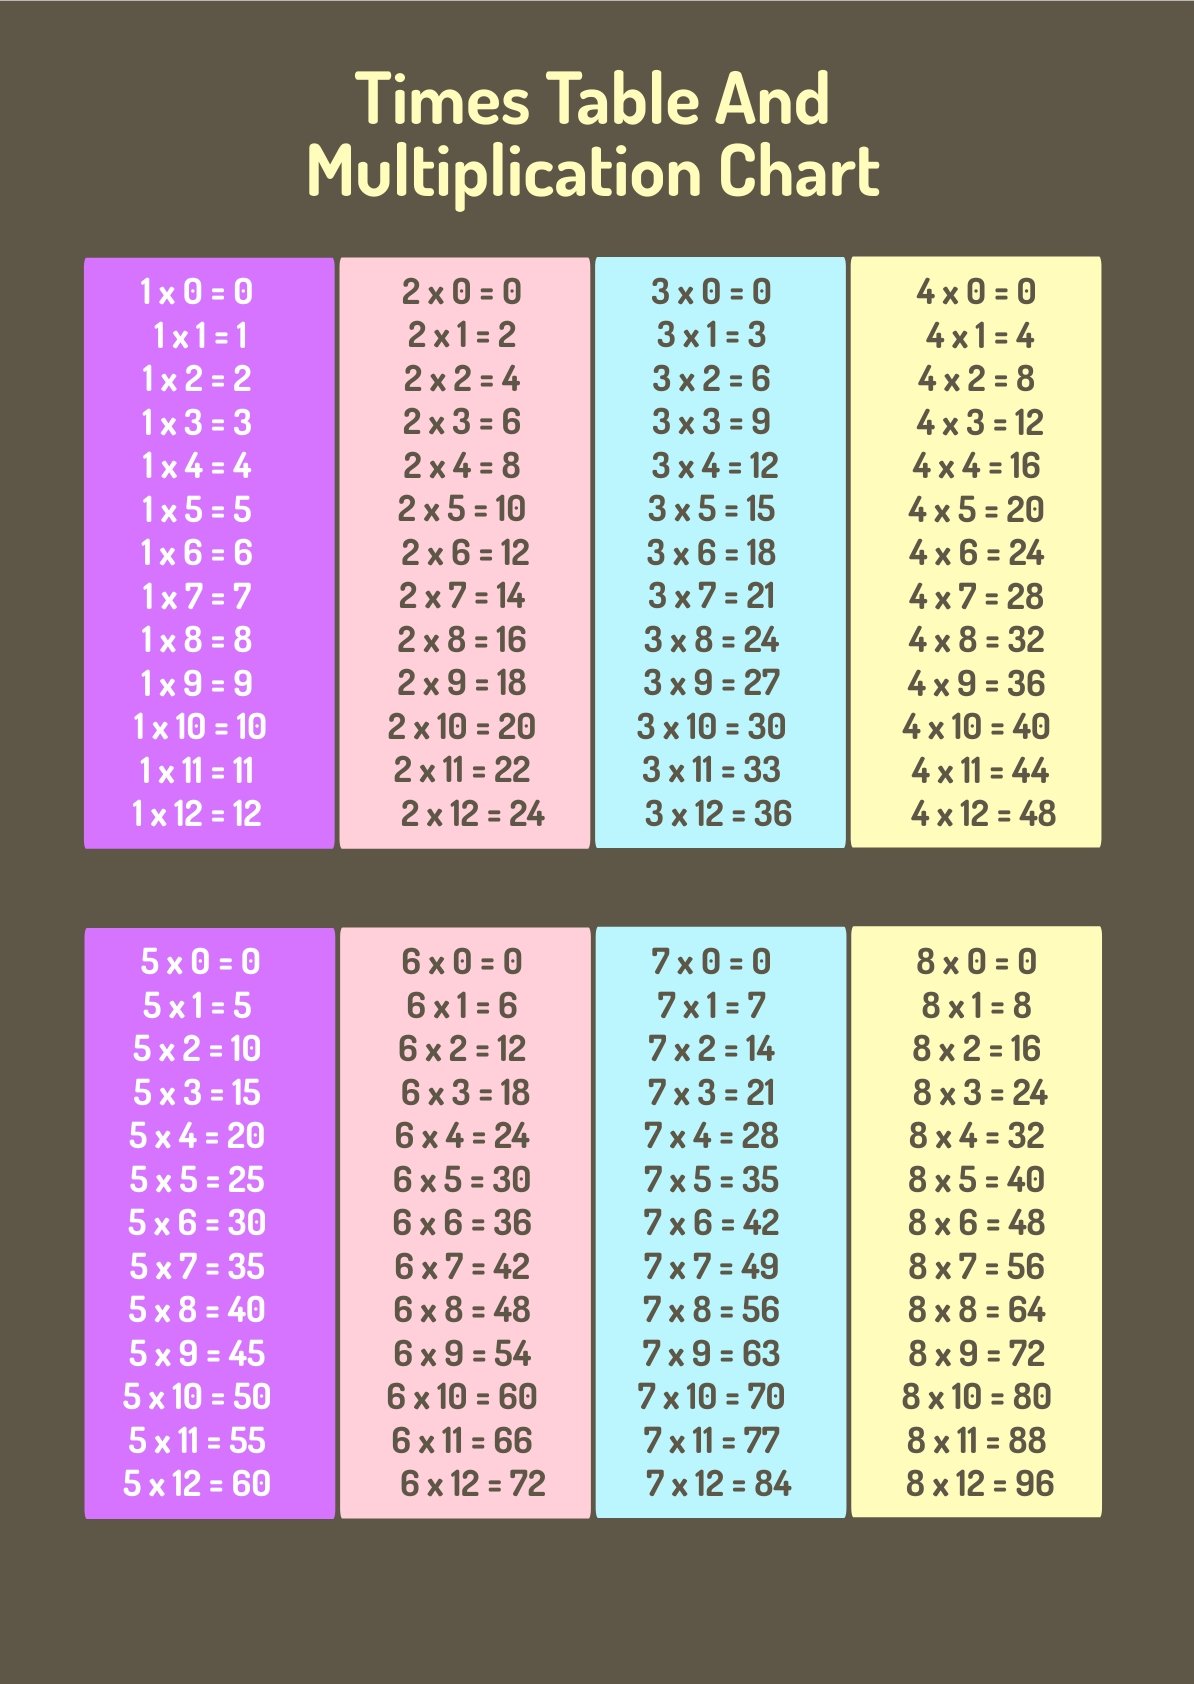 Times Table And Multiplication Chart in PDF, Illustrator